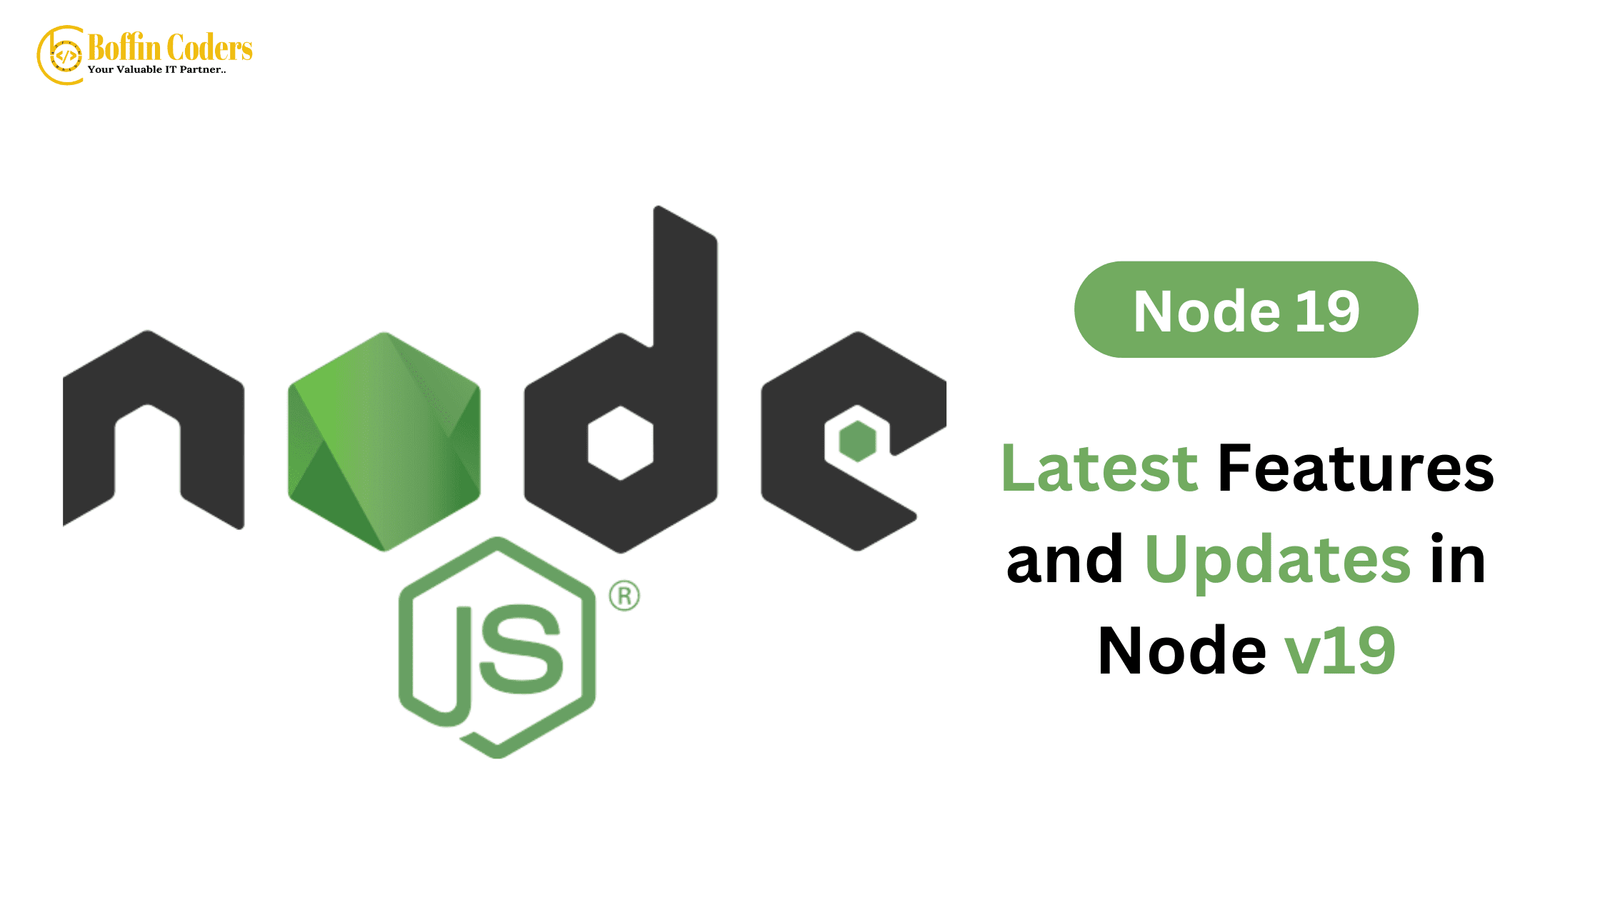 Node 19: Latest Features and Updates in Node v19